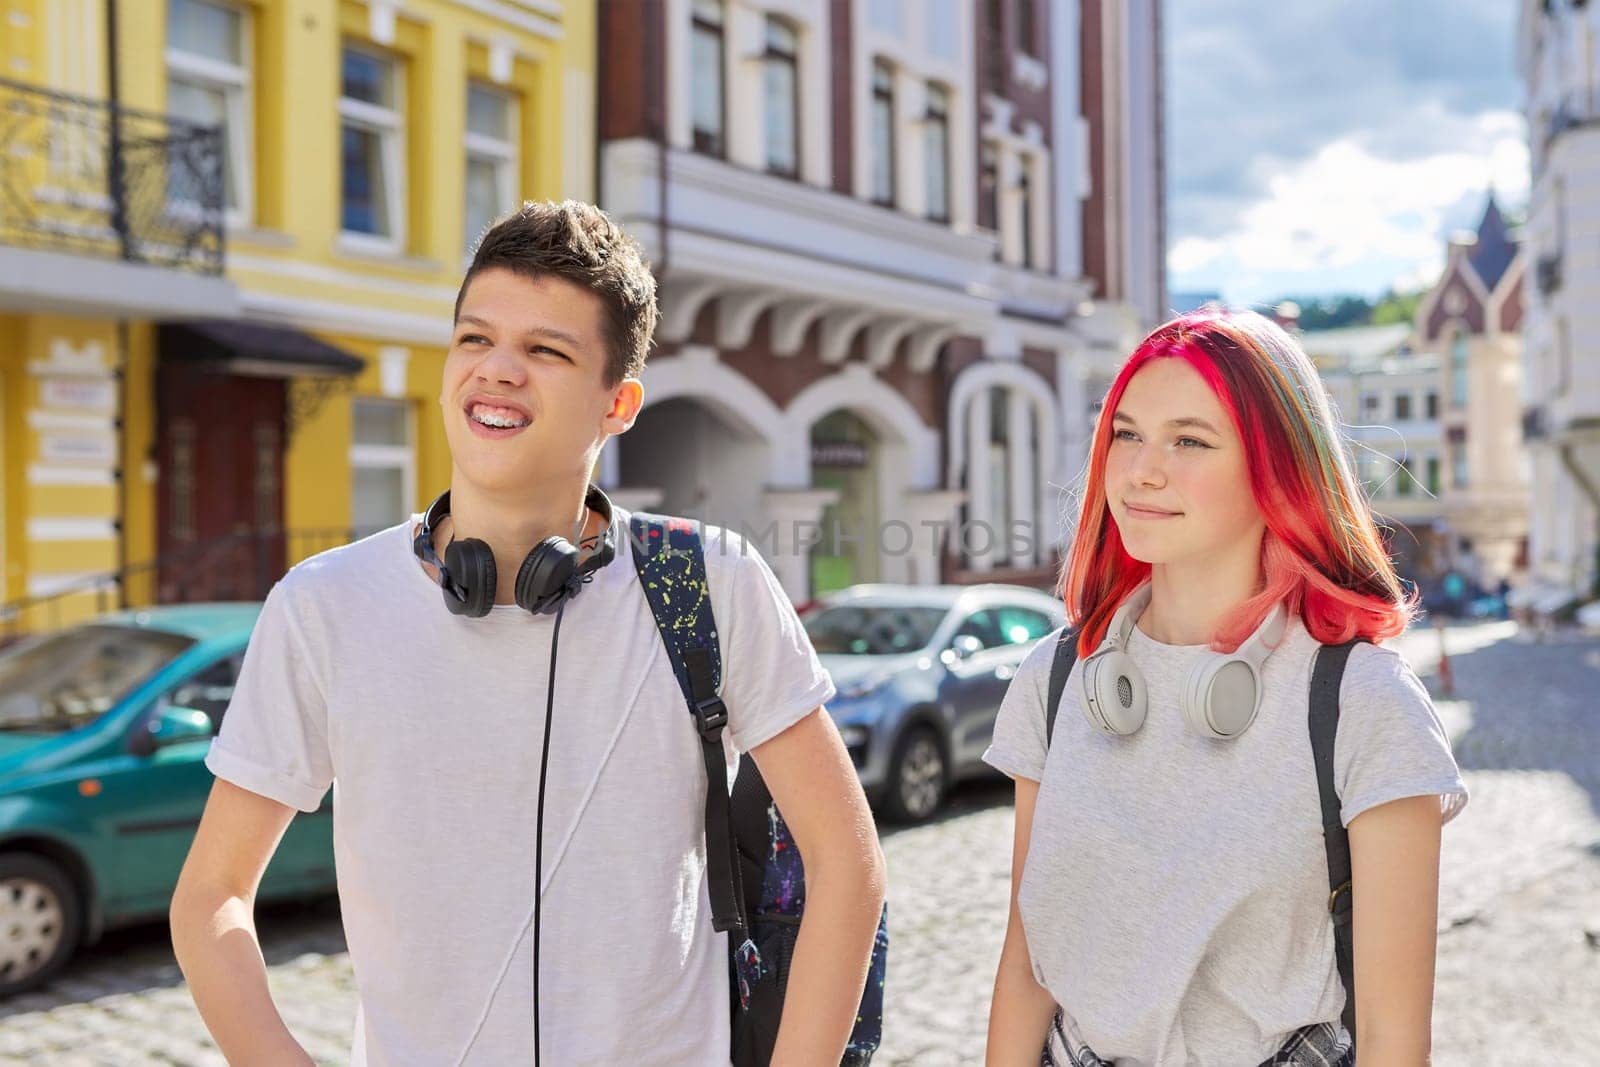 Youth, teenagers, lifestyle, portrait of smiling happy teenage boy and girl college students with backpacks, headphones in sunny city on the street